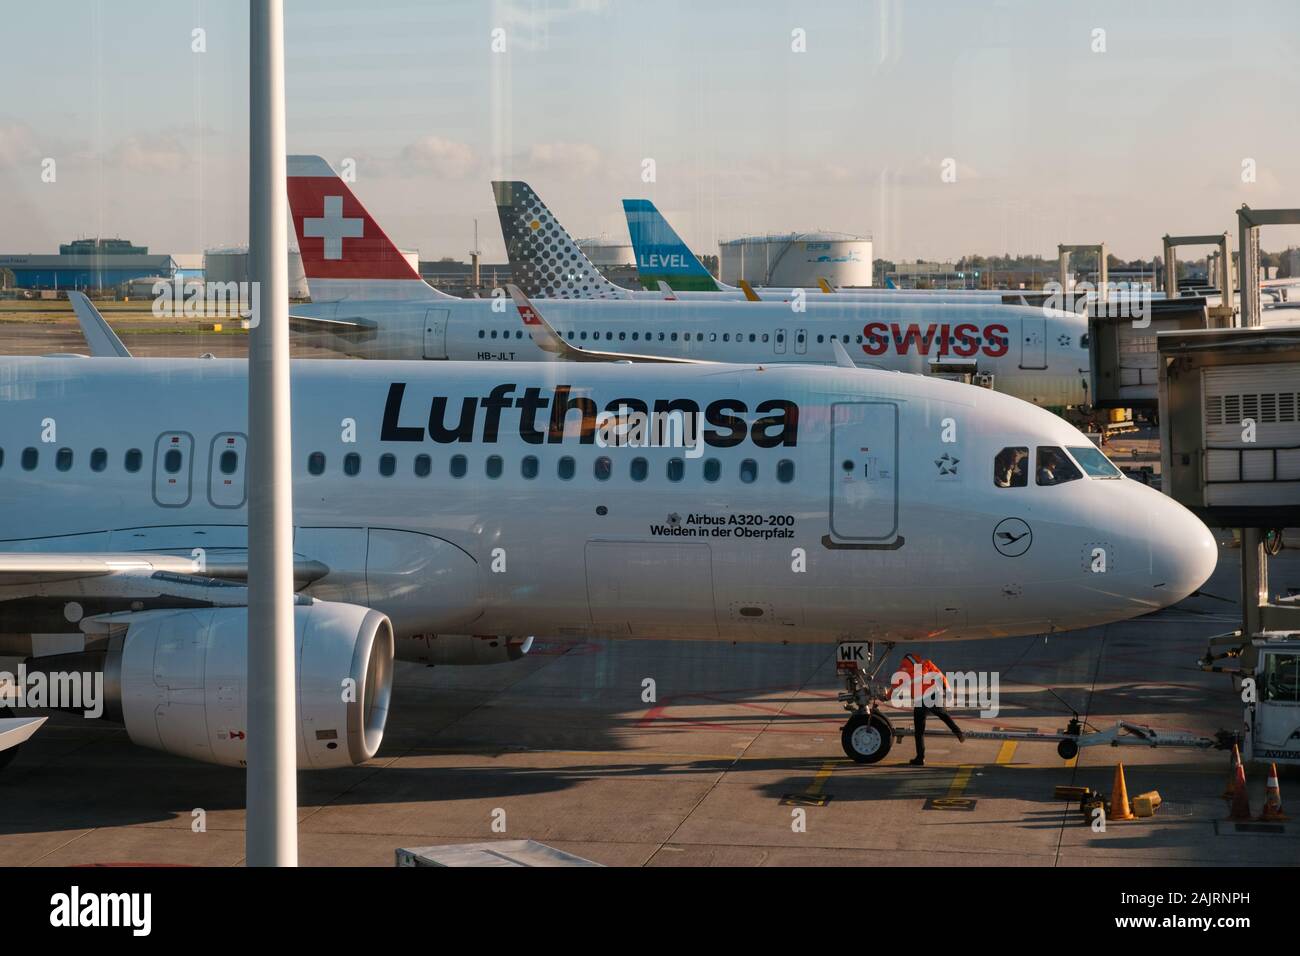 Amsterdam, Netherland - December, 2019: Lufthansa airplane and other airlines on airport in Amsterdam Stock Photo